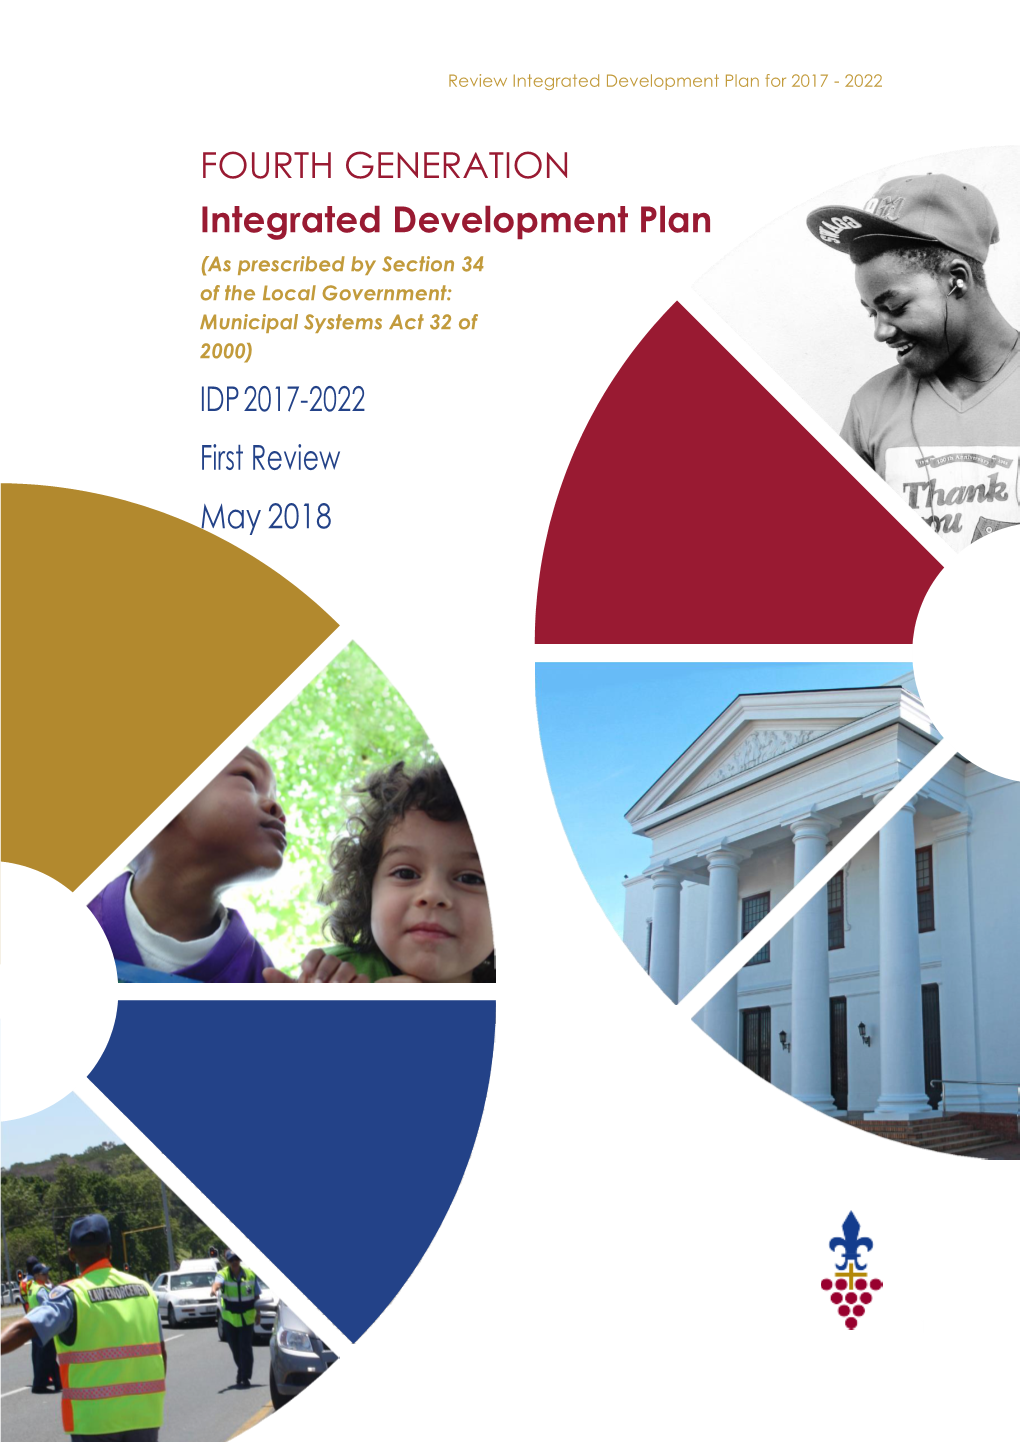 Stellenbosch Municipality MIG Investment 2017/18 to Revised Figures for 2018/19 2019/20 and 2019/20